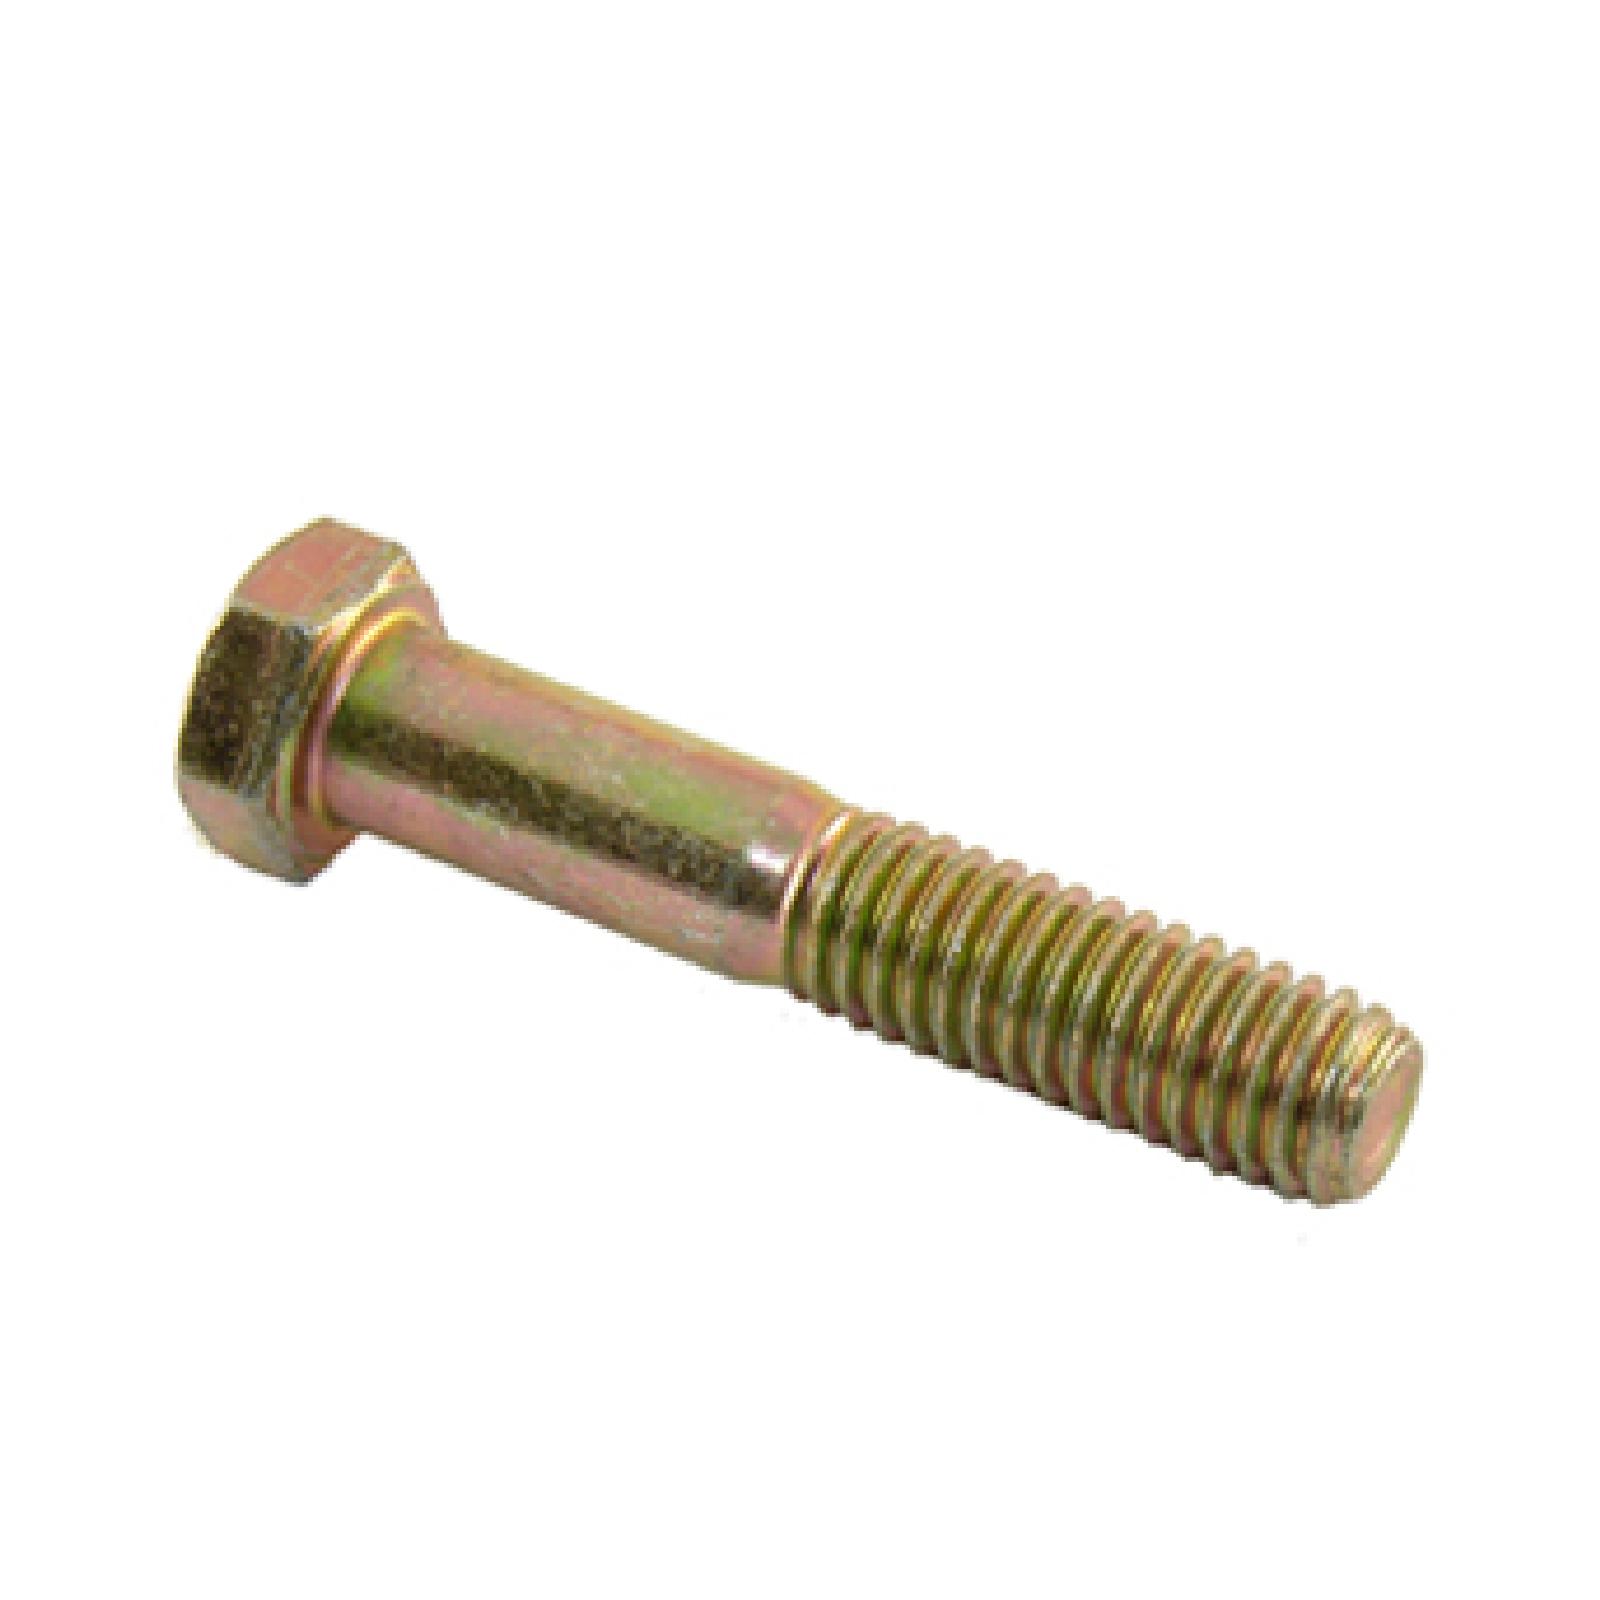 BOLT 3/8 16X2. 0 GR part# 7103096 by MTD - Click Image to Close